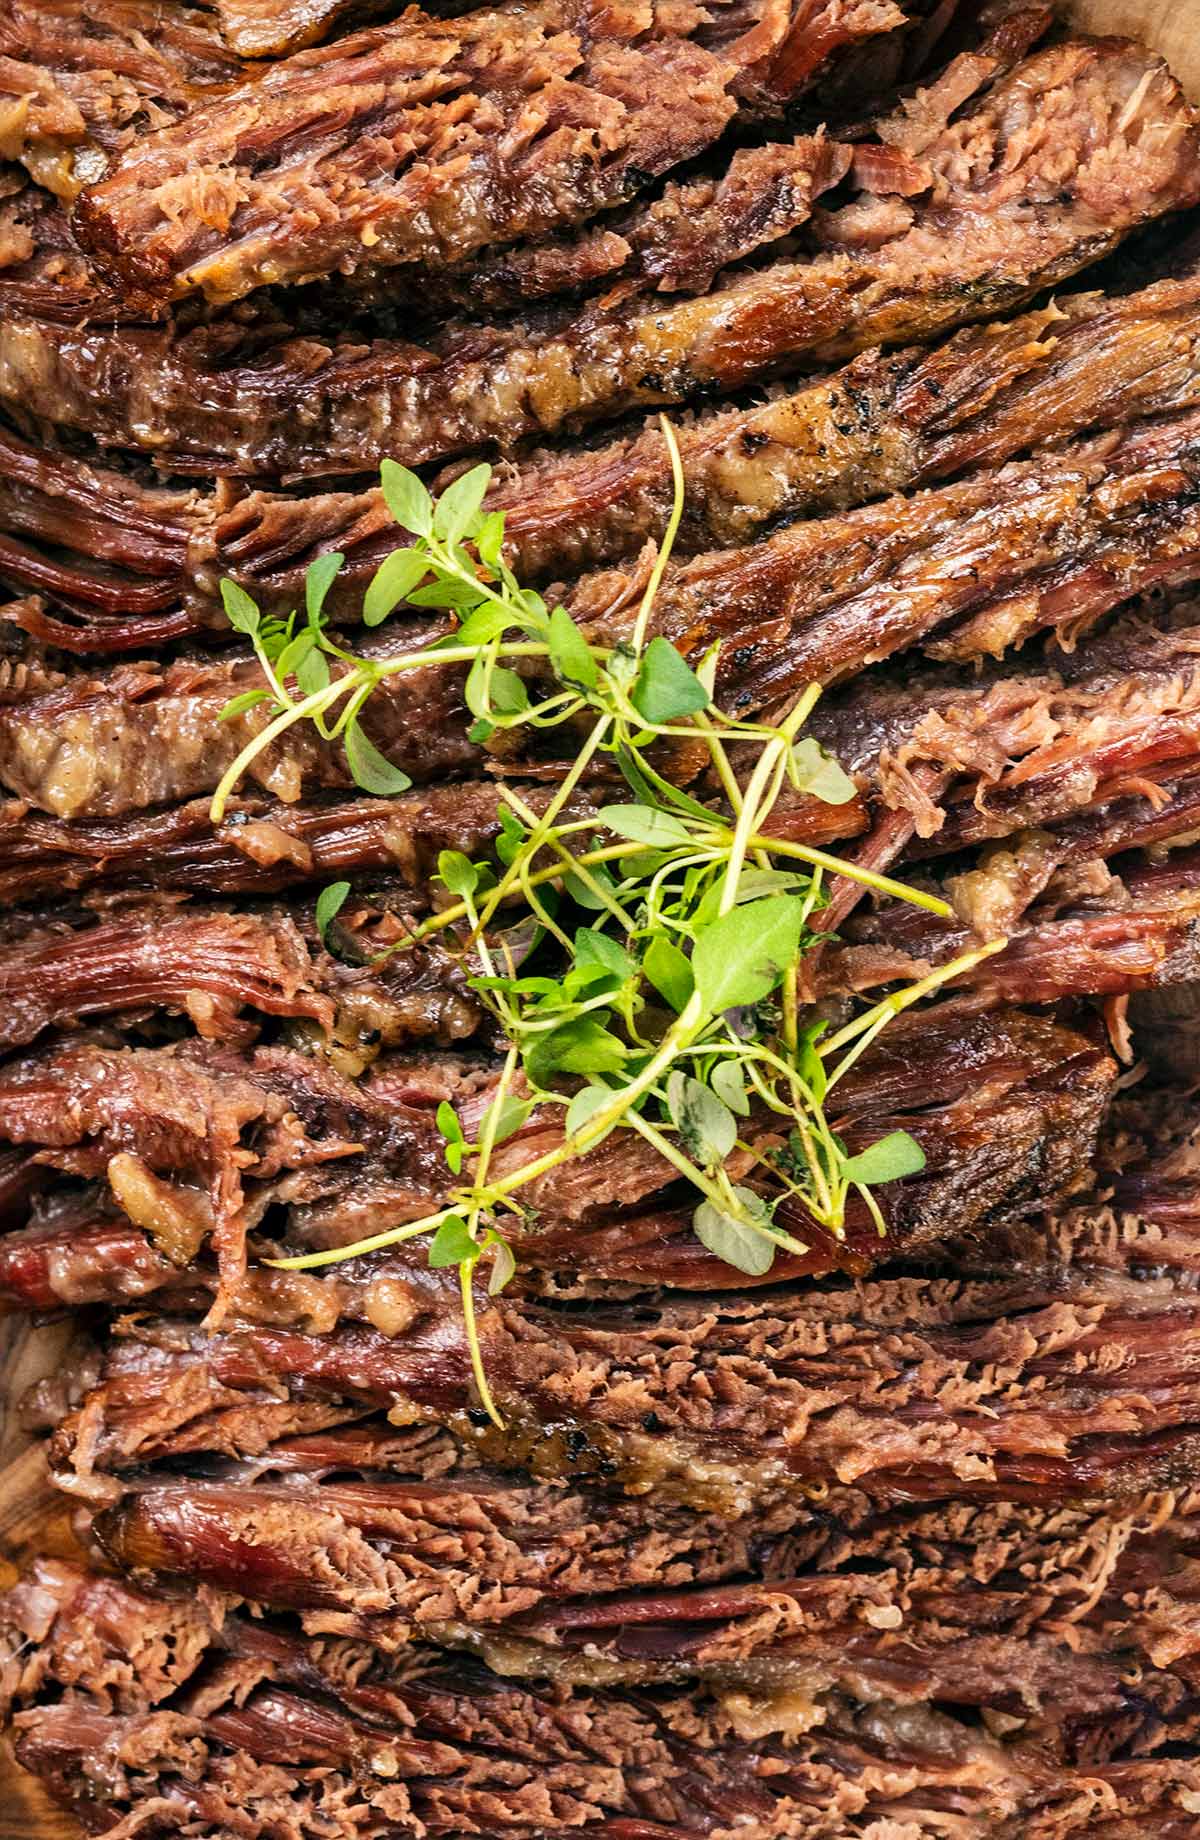 Slices of cooked brisket with a small bunch of cress on top.